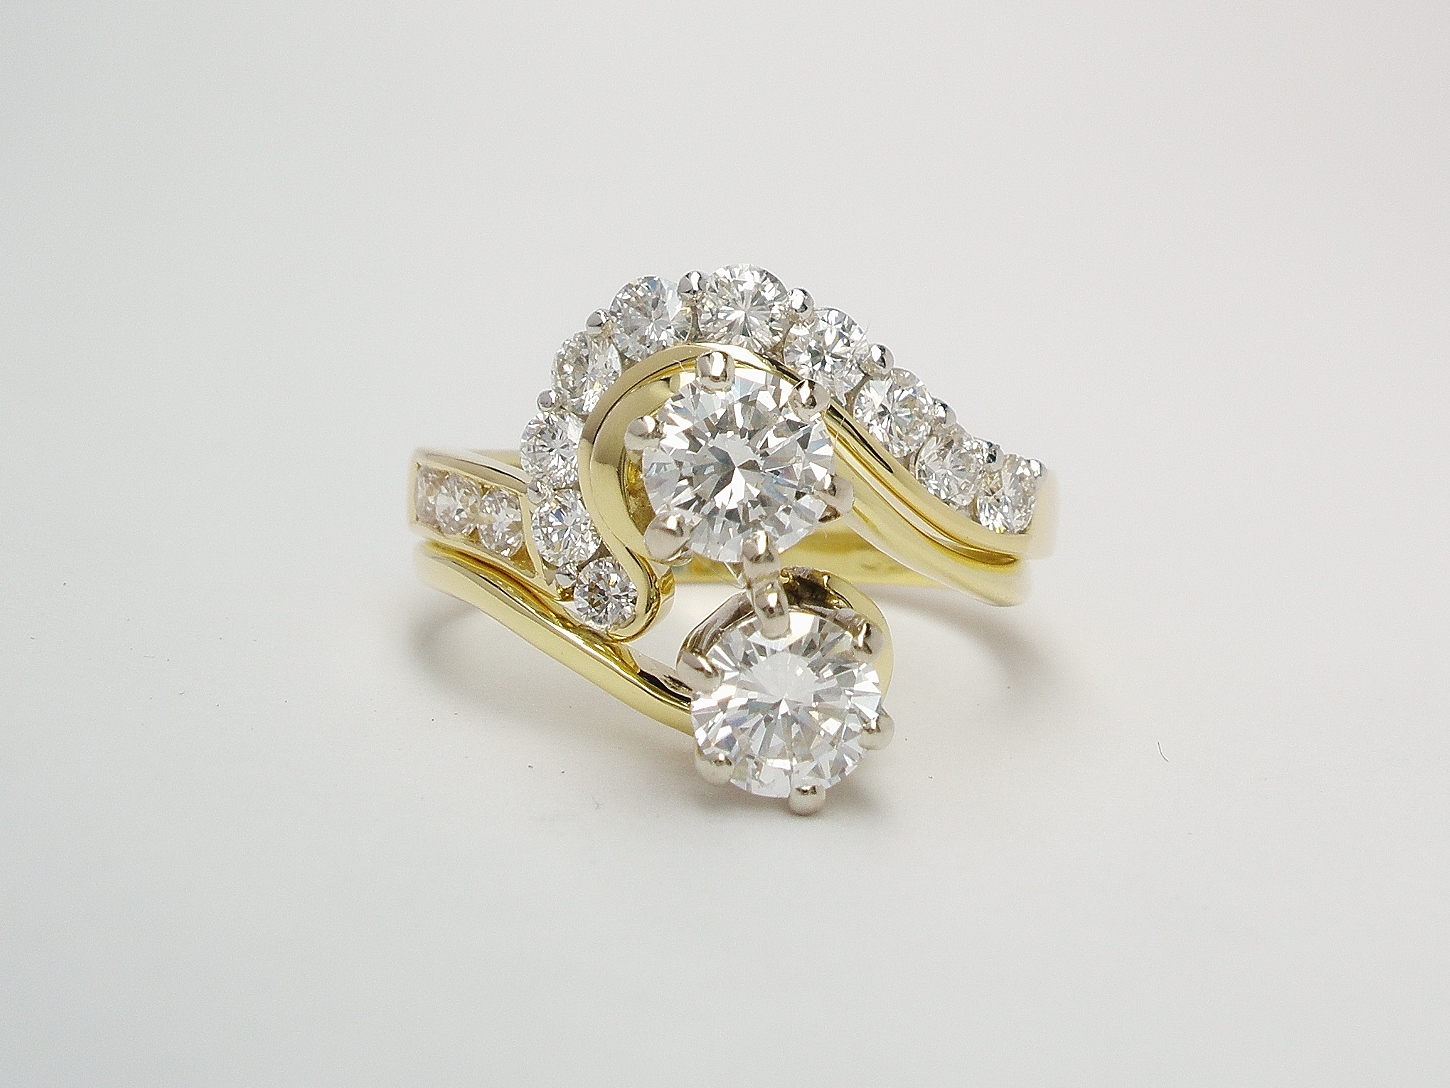 A 13 stone round brilliant cut diamond channel and part channel set ring mounted in 18ct. yellow gold and platinum and shaped to fit around a 2 stone cross-over engagement ring.